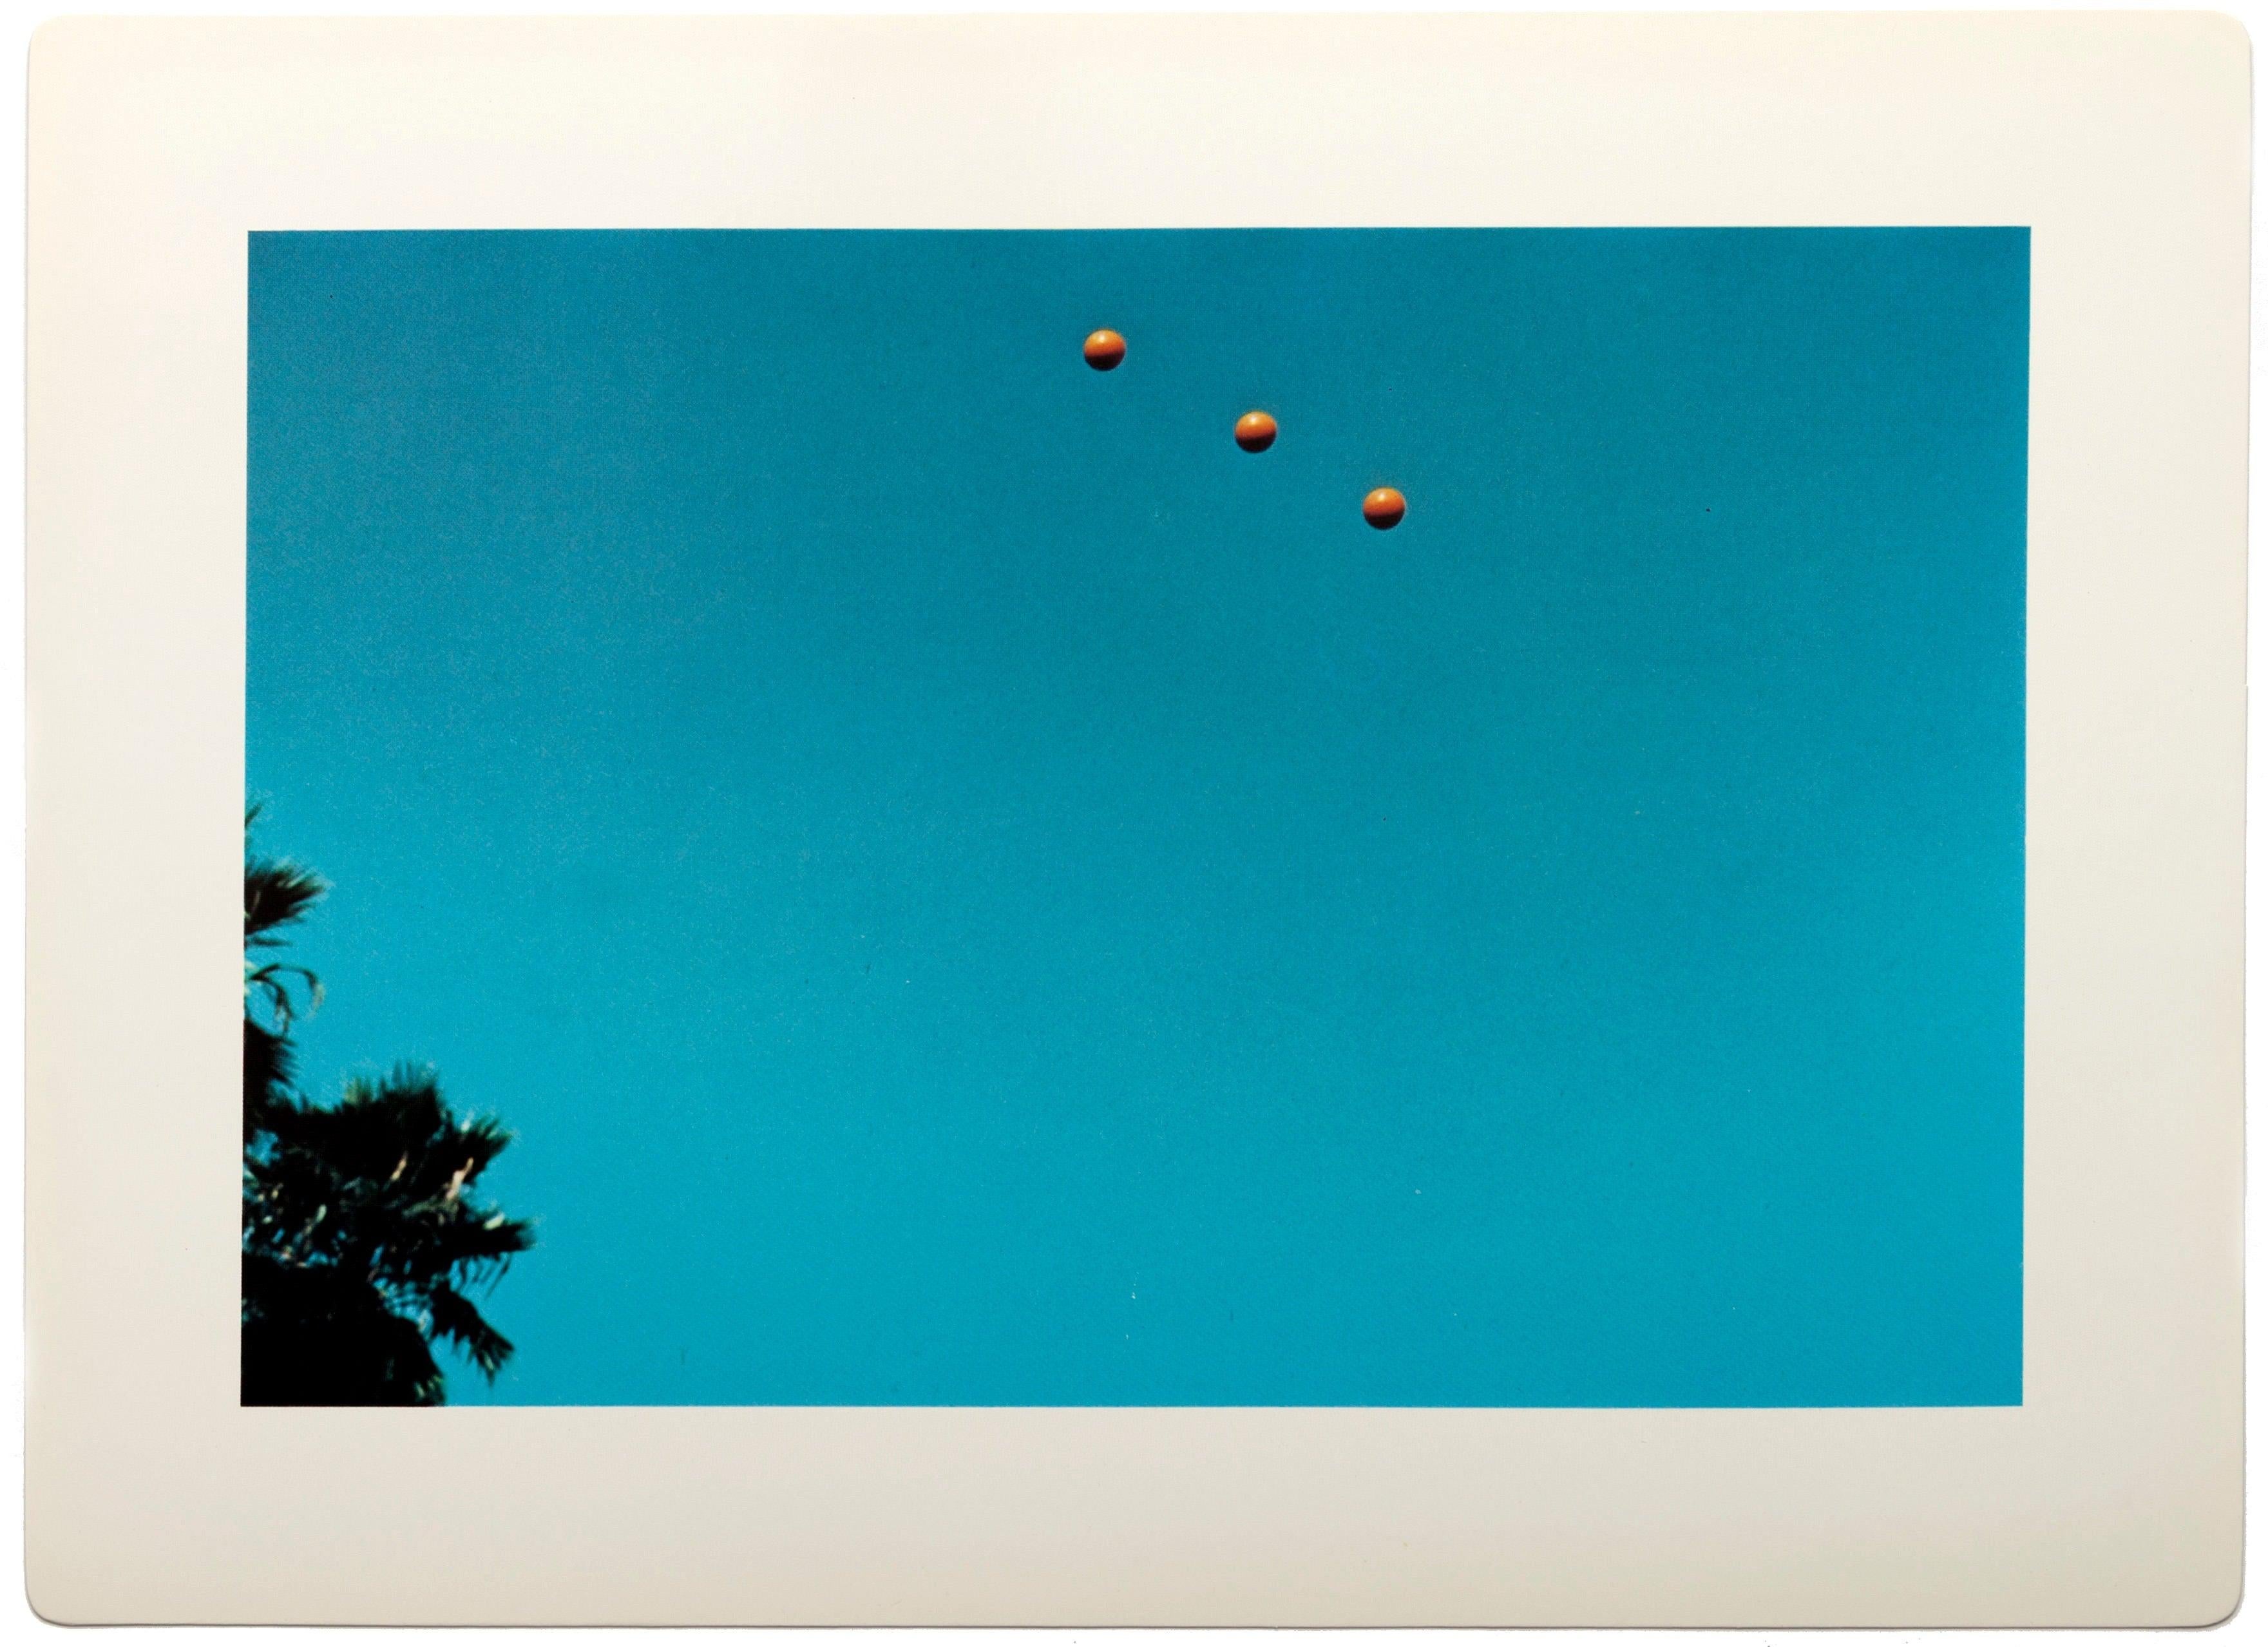 JOHN BALDESSARI
Throwing Three Balls in the Air to Get a Straight Line (Best of Thirty-Six Attempts), 1973
Complete set of twelve offset lithographs in colours
On coated stock paper, with title and justification pages
Signed by the publishers and